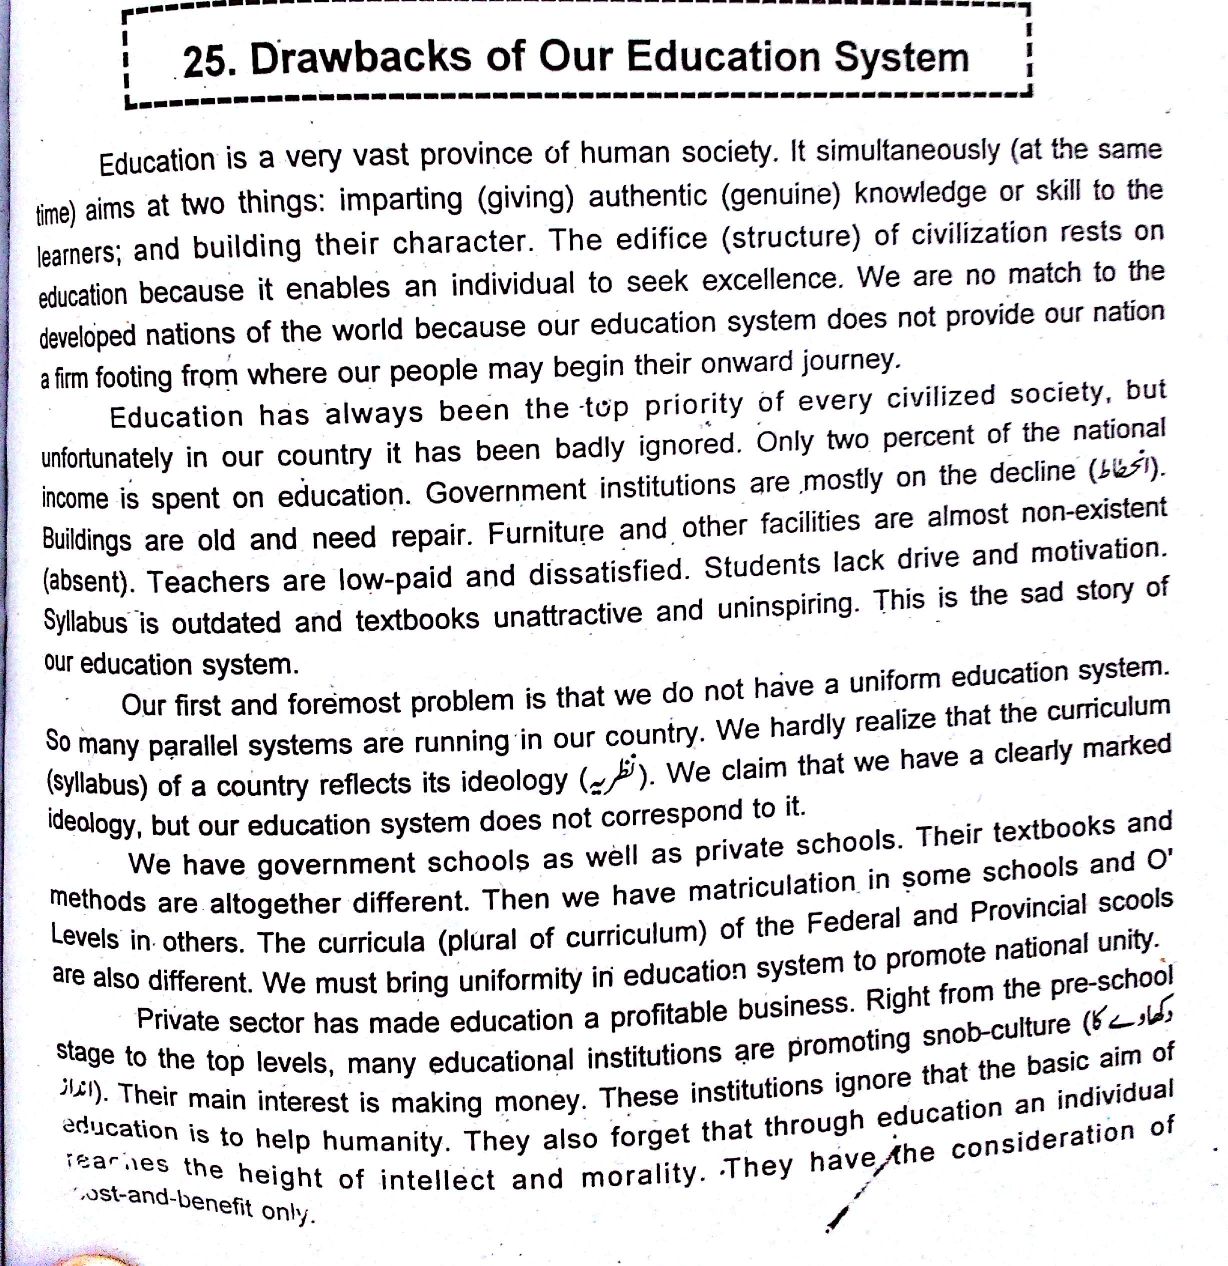 1223 Words Essay on Education System in India